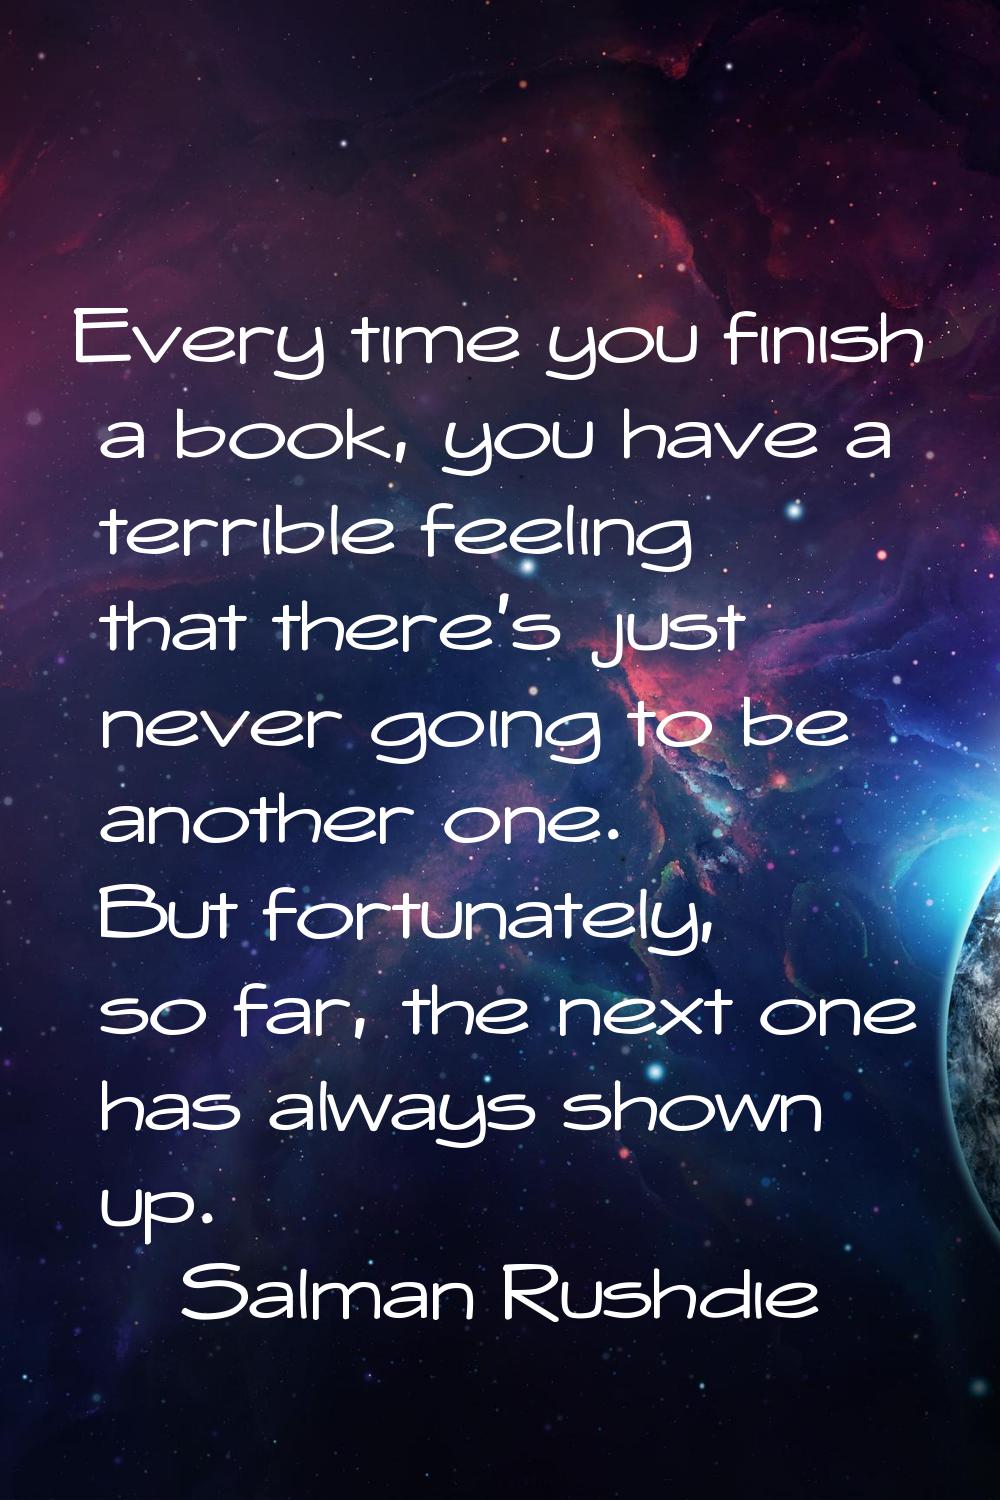 Every time you finish a book, you have a terrible feeling that there's just never going to be anoth